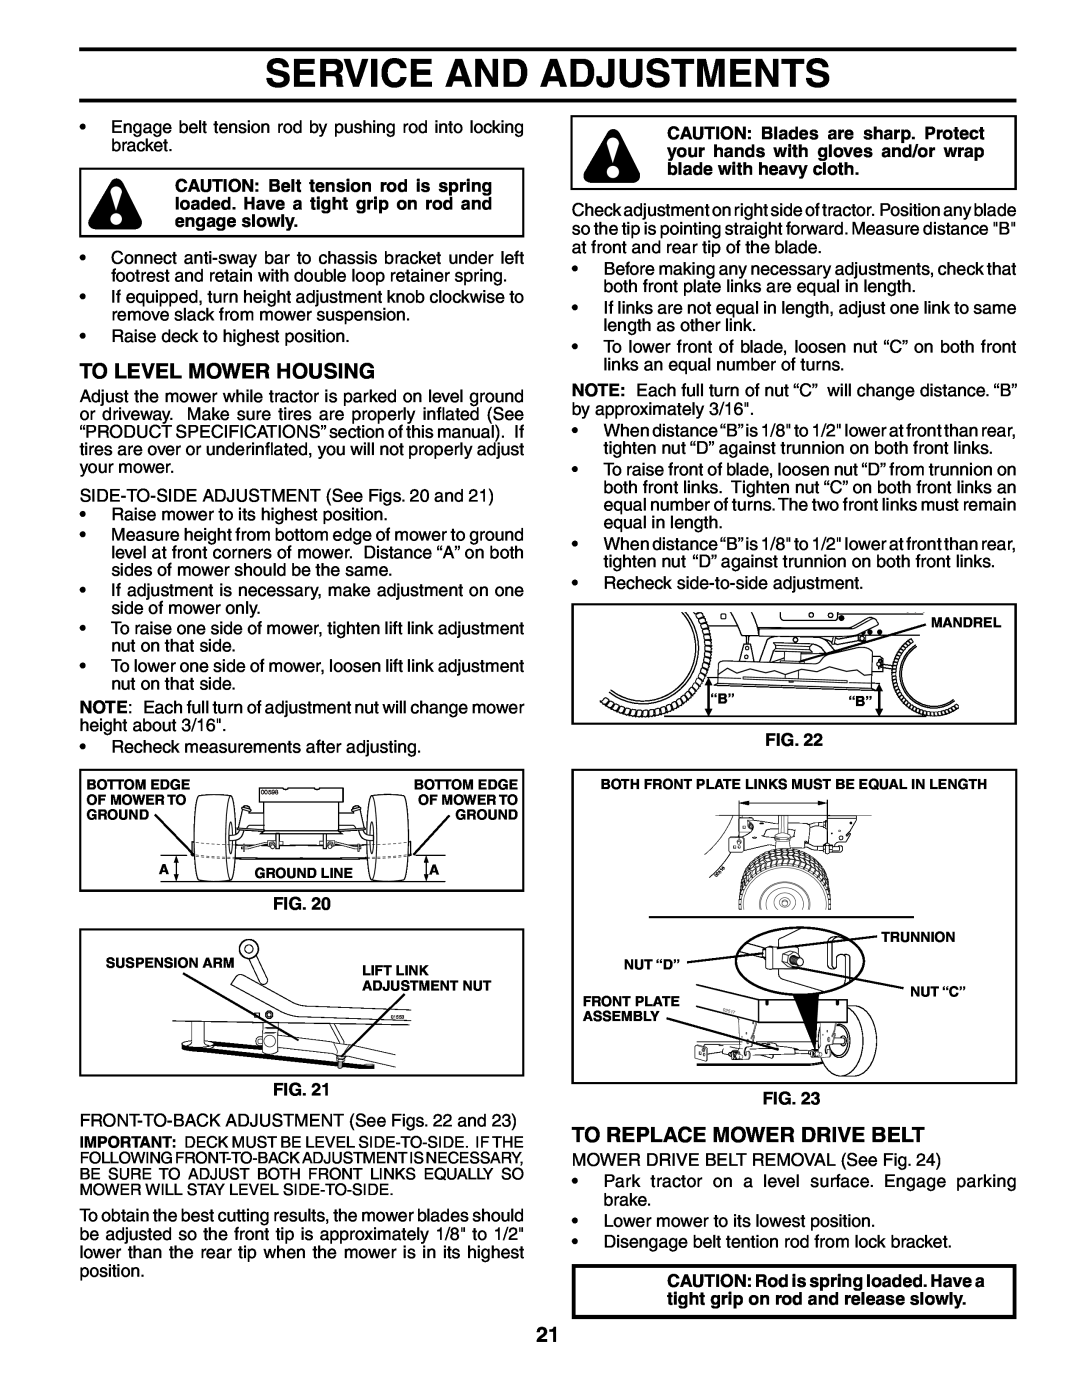 Poulan PD20PH48STB owner manual To Level Mower Housing, To Replace Mower Drive Belt, Service And Adjustments 